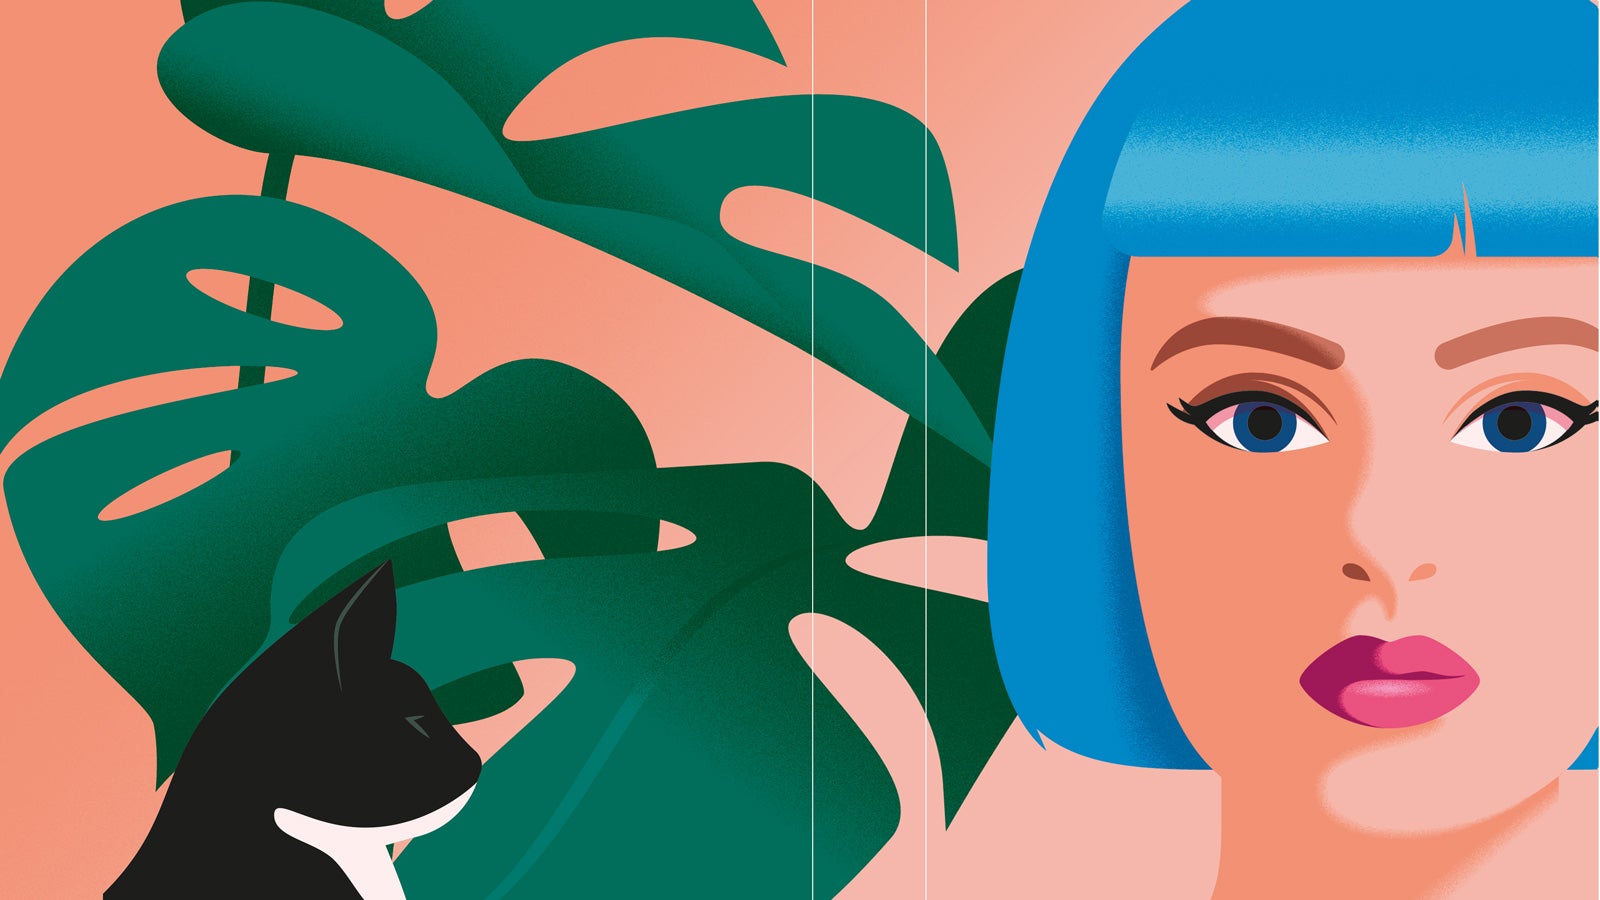 An illustration showing a woman wearing an electric blue wig, next to a black cat with the leaves of a house plant in the background